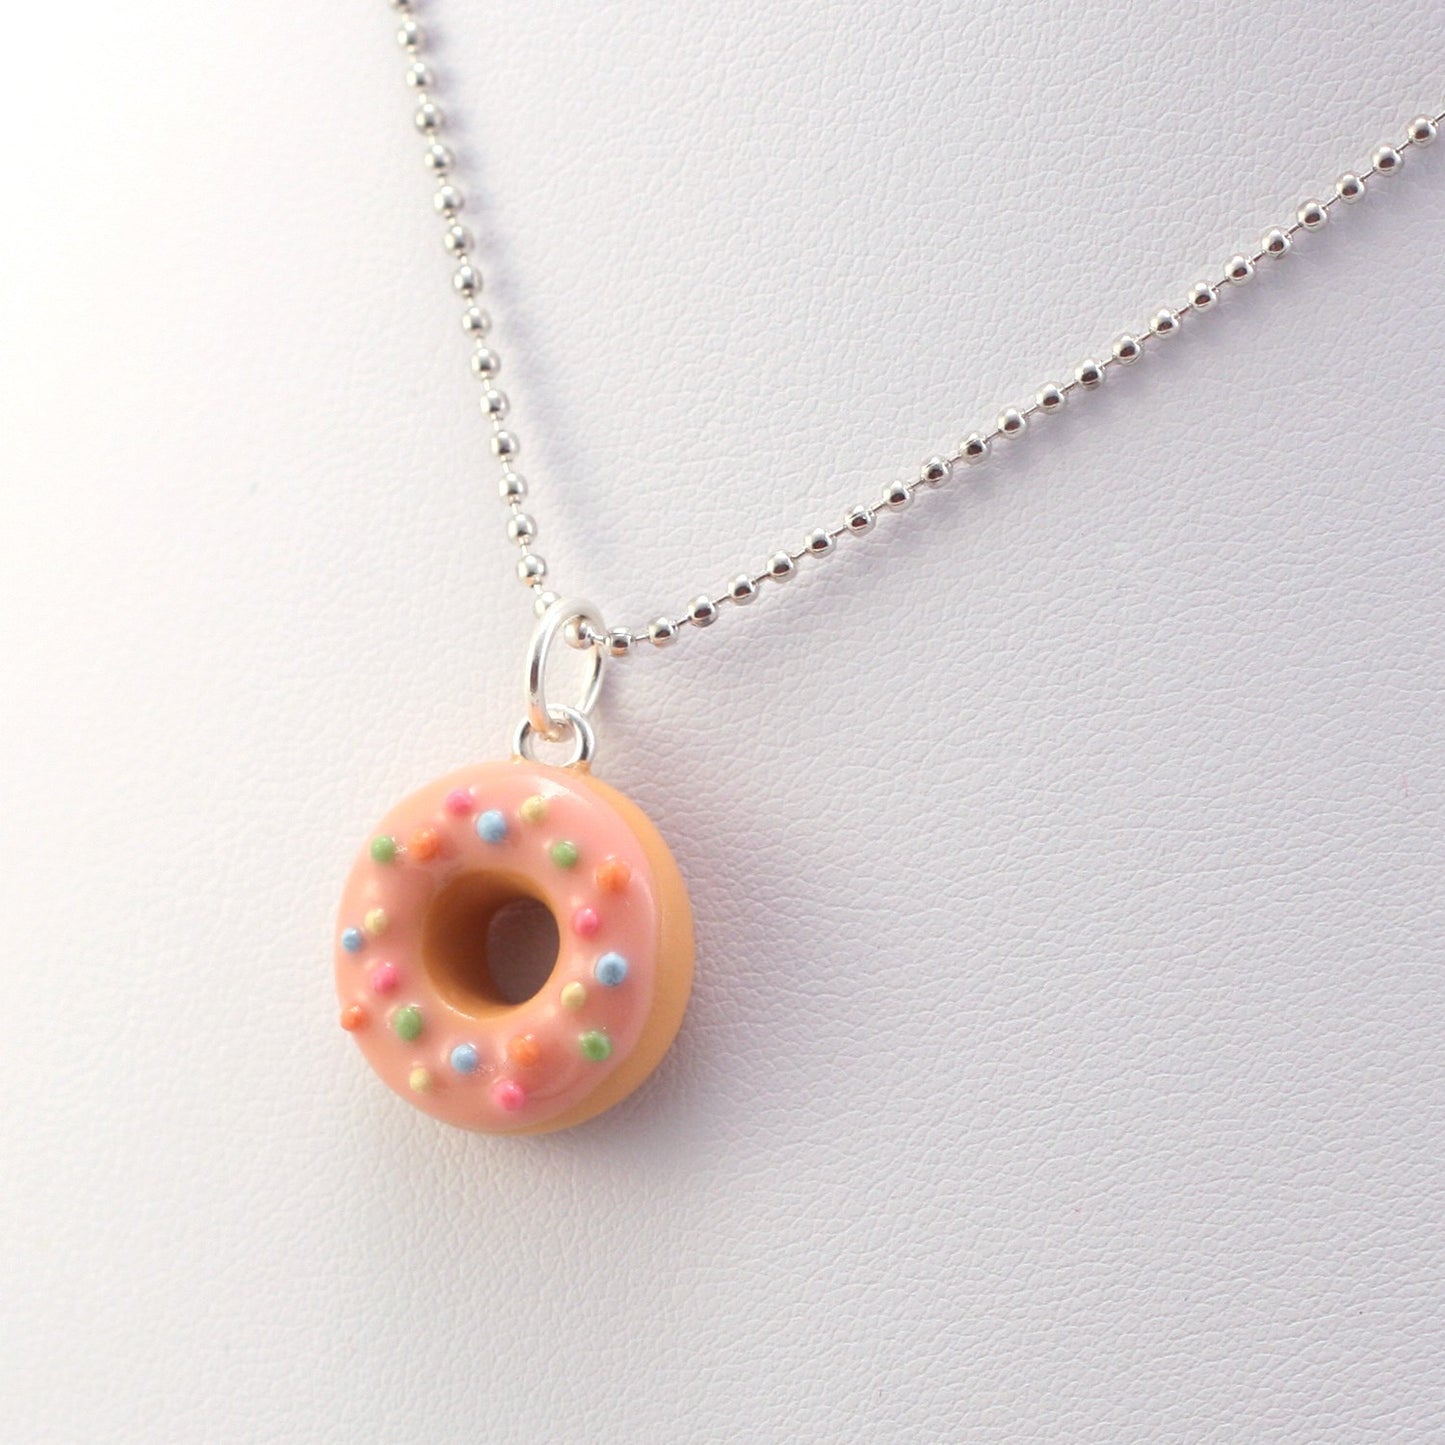 Scented Strawberry Sprinkles Donut Necklace - Tiny Hands
 - 3